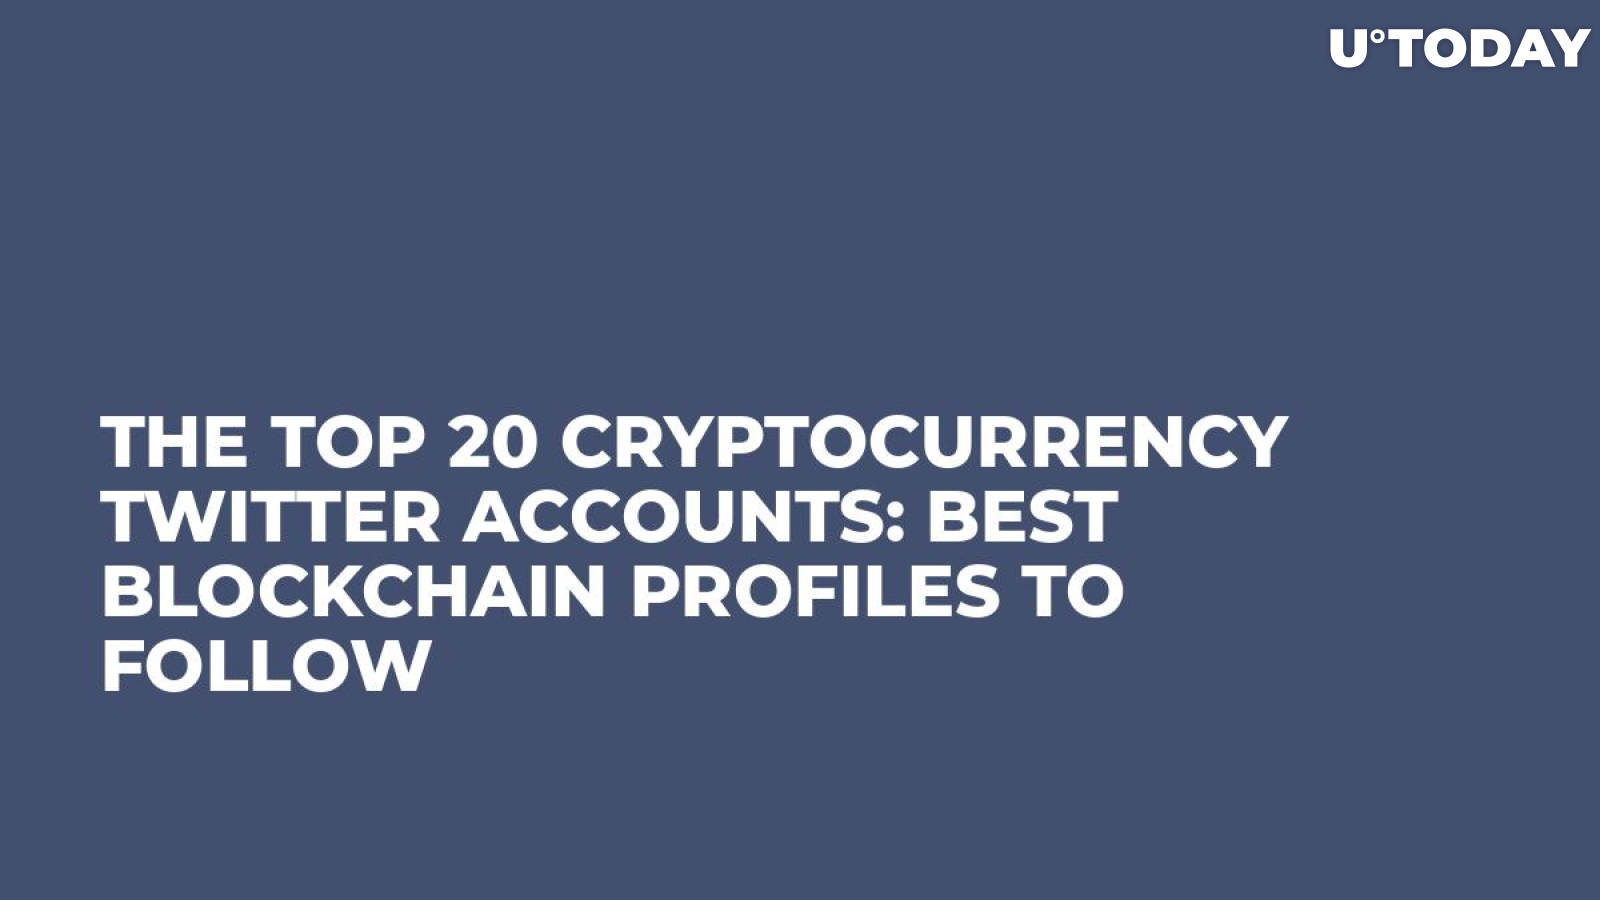 The Top 20 Cryptocurrency Twitter Accounts: Best Blockchain Profiles to Follow